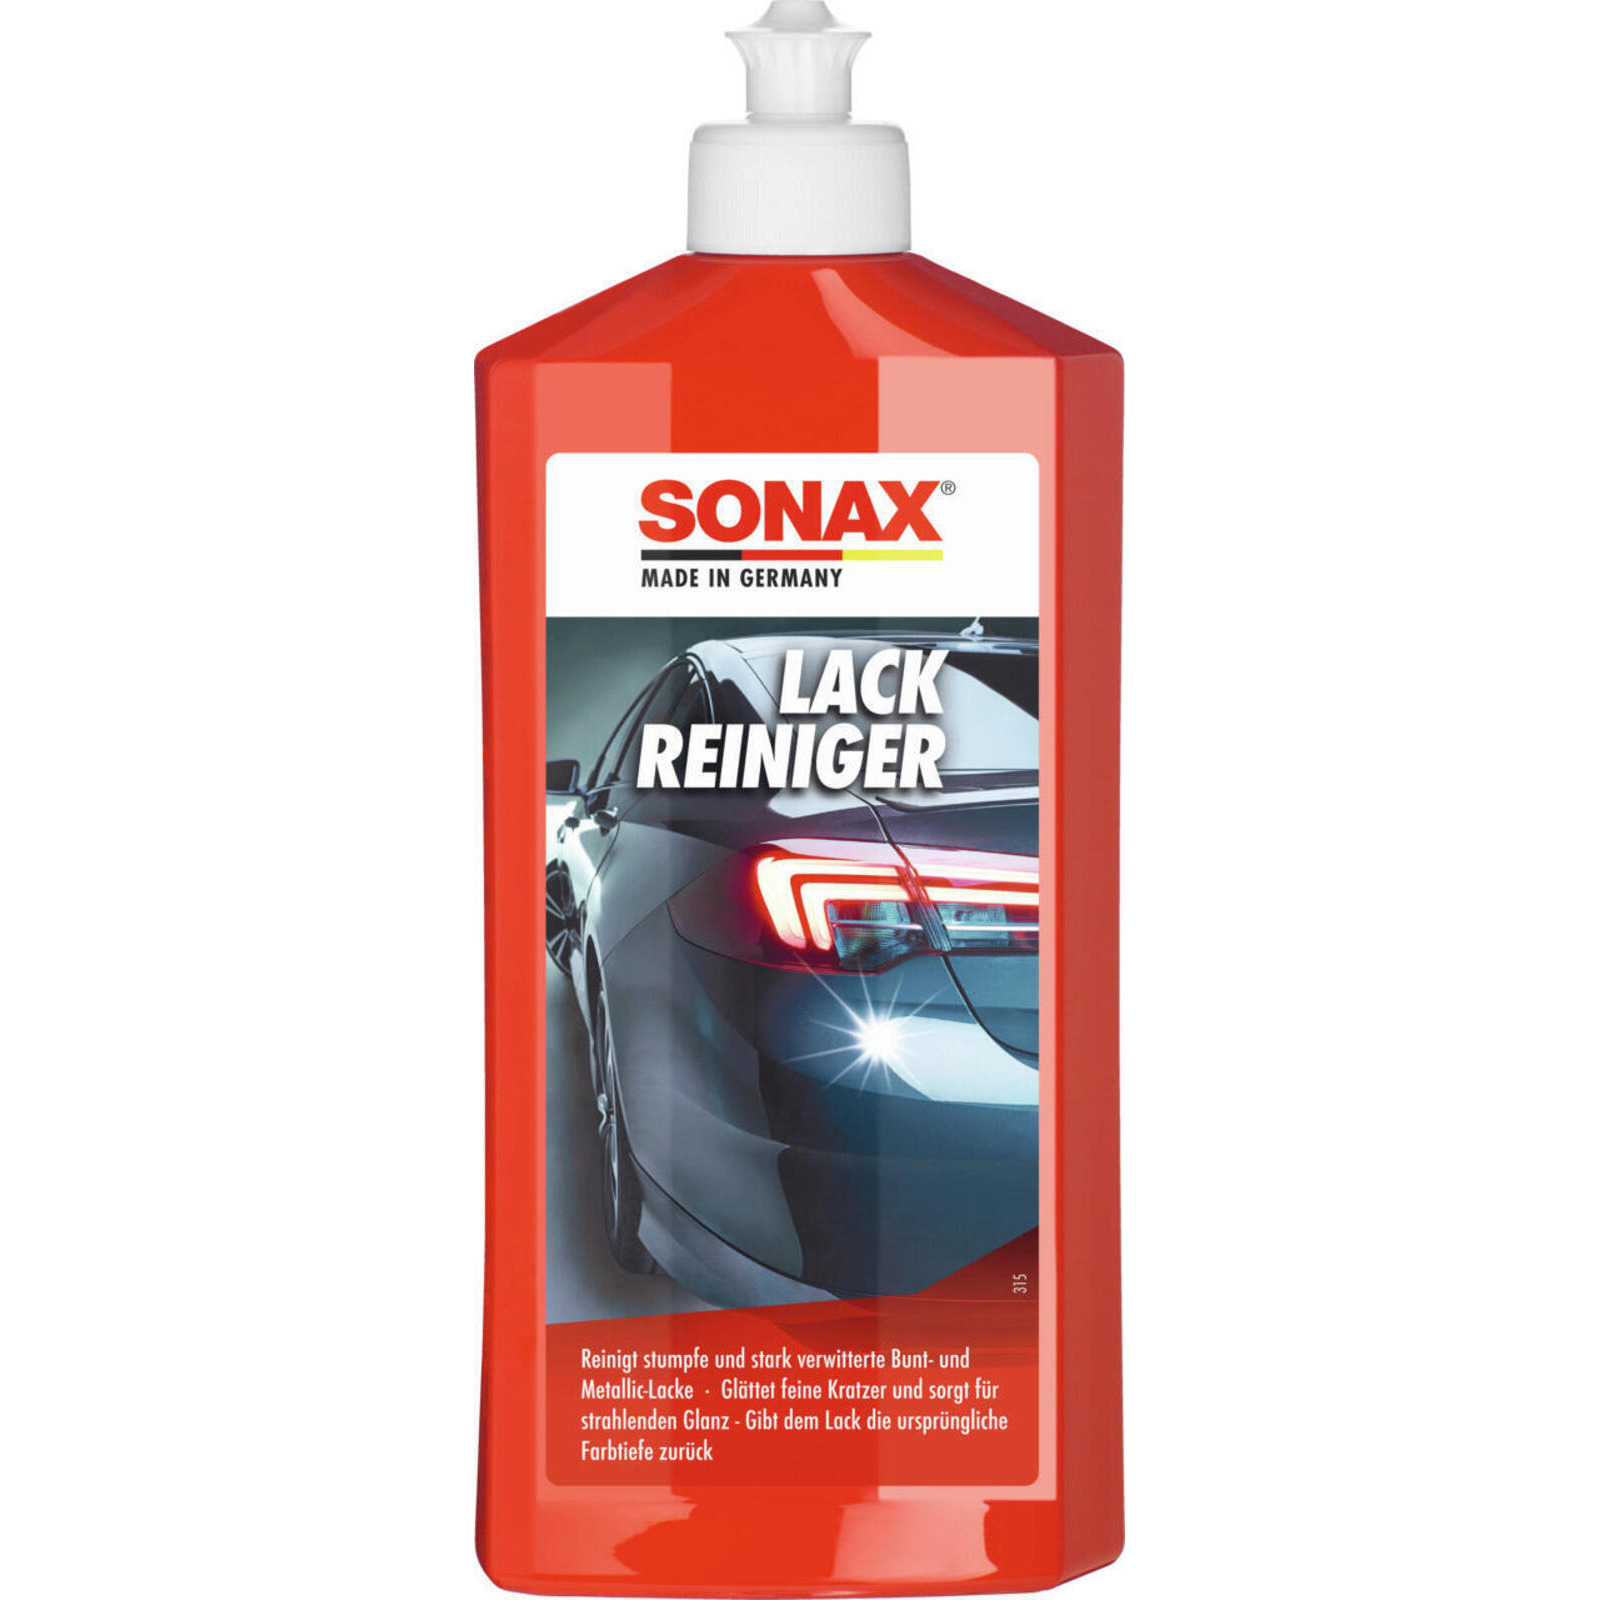 SONAX Paint Cleaner Paintwork cleaner